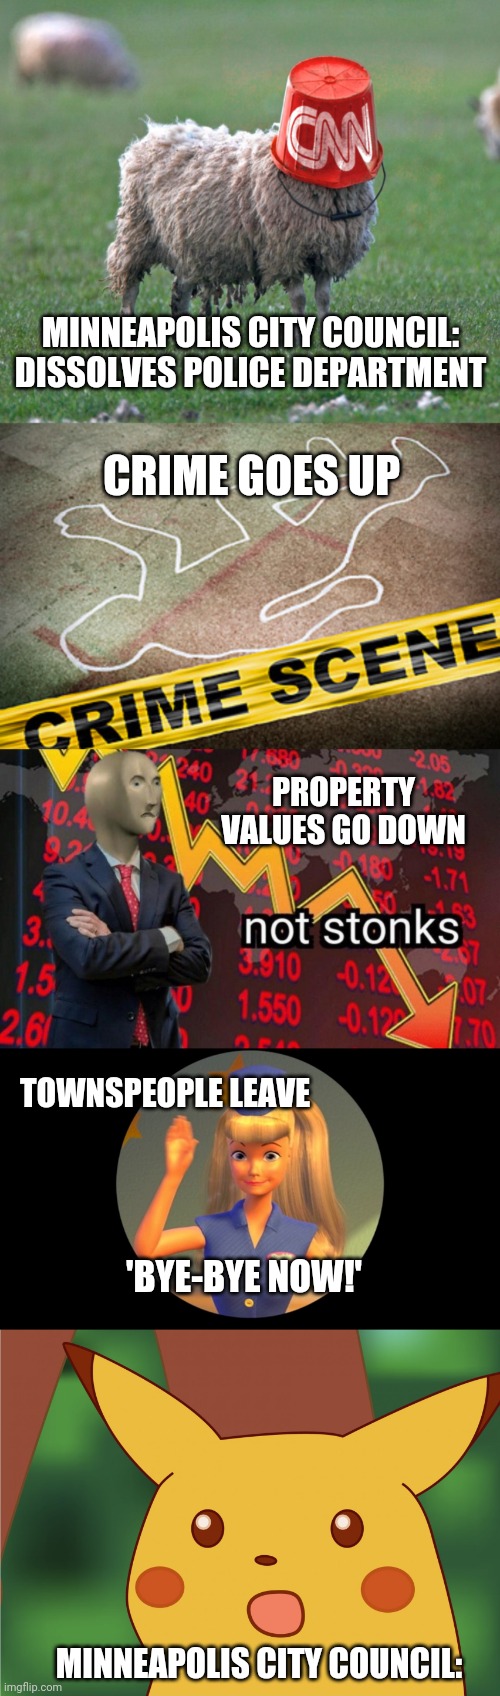 Support our police officers! | MINNEAPOLIS CITY COUNCIL:
DISSOLVES POLICE DEPARTMENT; CRIME GOES UP; PROPERTY VALUES GO DOWN; TOWNSPEOPLE LEAVE; 'BYE-BYE NOW!'; MINNEAPOLIS CITY COUNCIL: | image tagged in not stonks,minnesota,blue lives matter,all lives matter,police,and everybody loses their minds | made w/ Imgflip meme maker